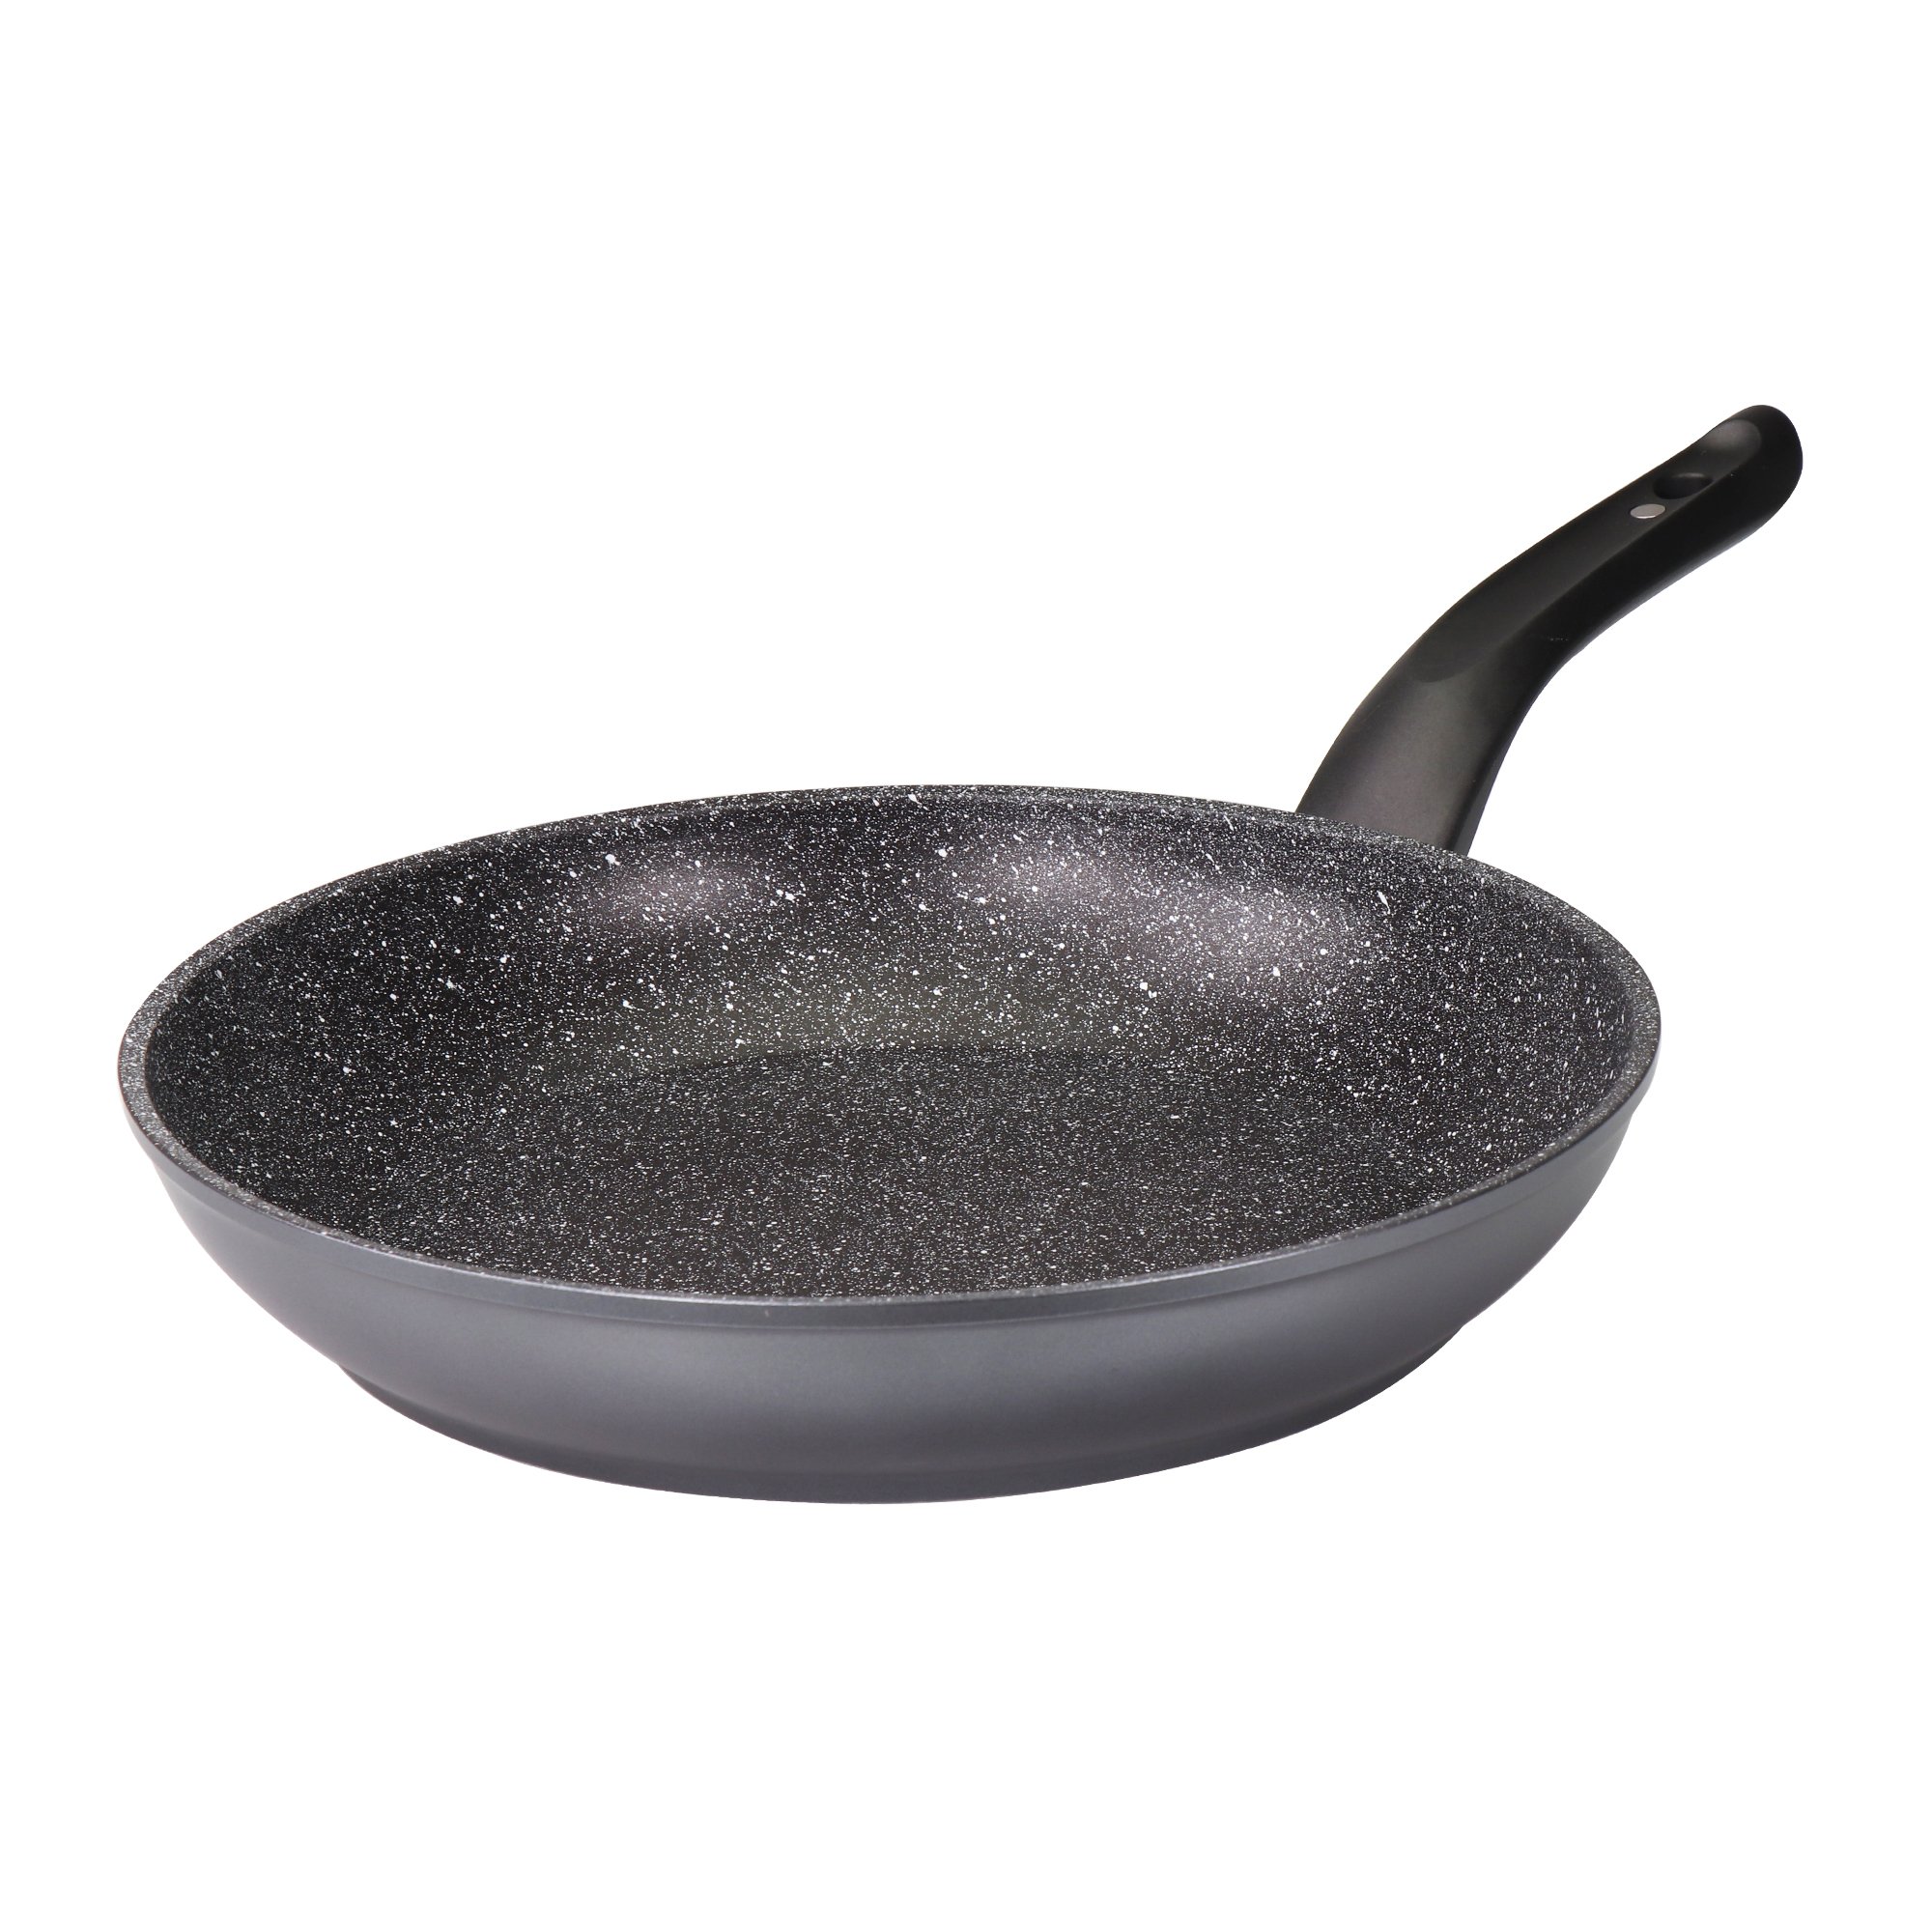 STONELINE® Frying Pan 28 cm, with Magnetic Handle, Non-Stick Pan | Made in Germany 